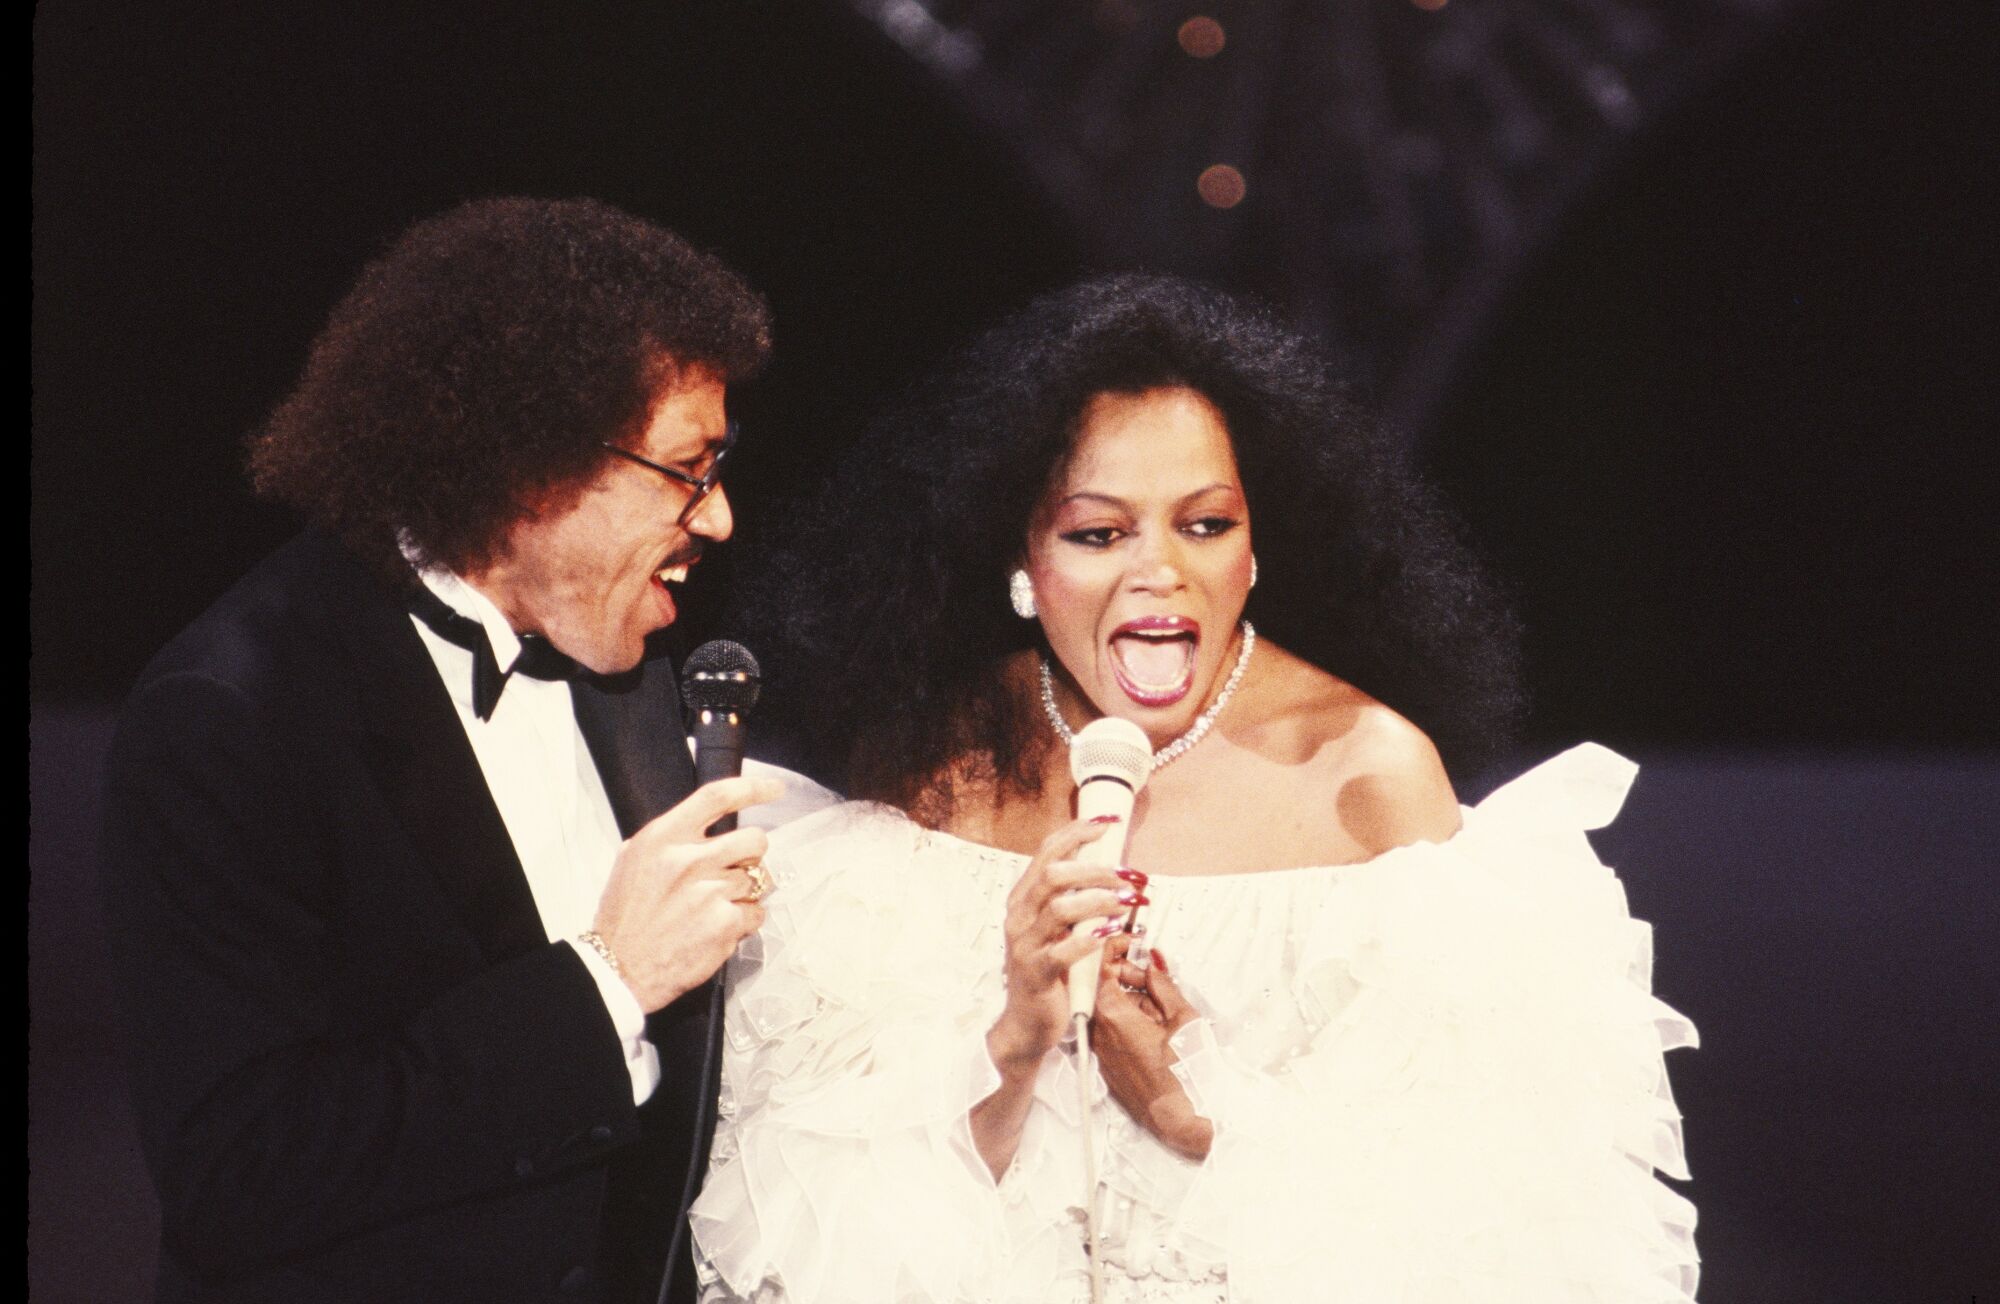 Lionel Richie, in a tux, and Diana Ross, in an evening gown, perform a duet on stage 